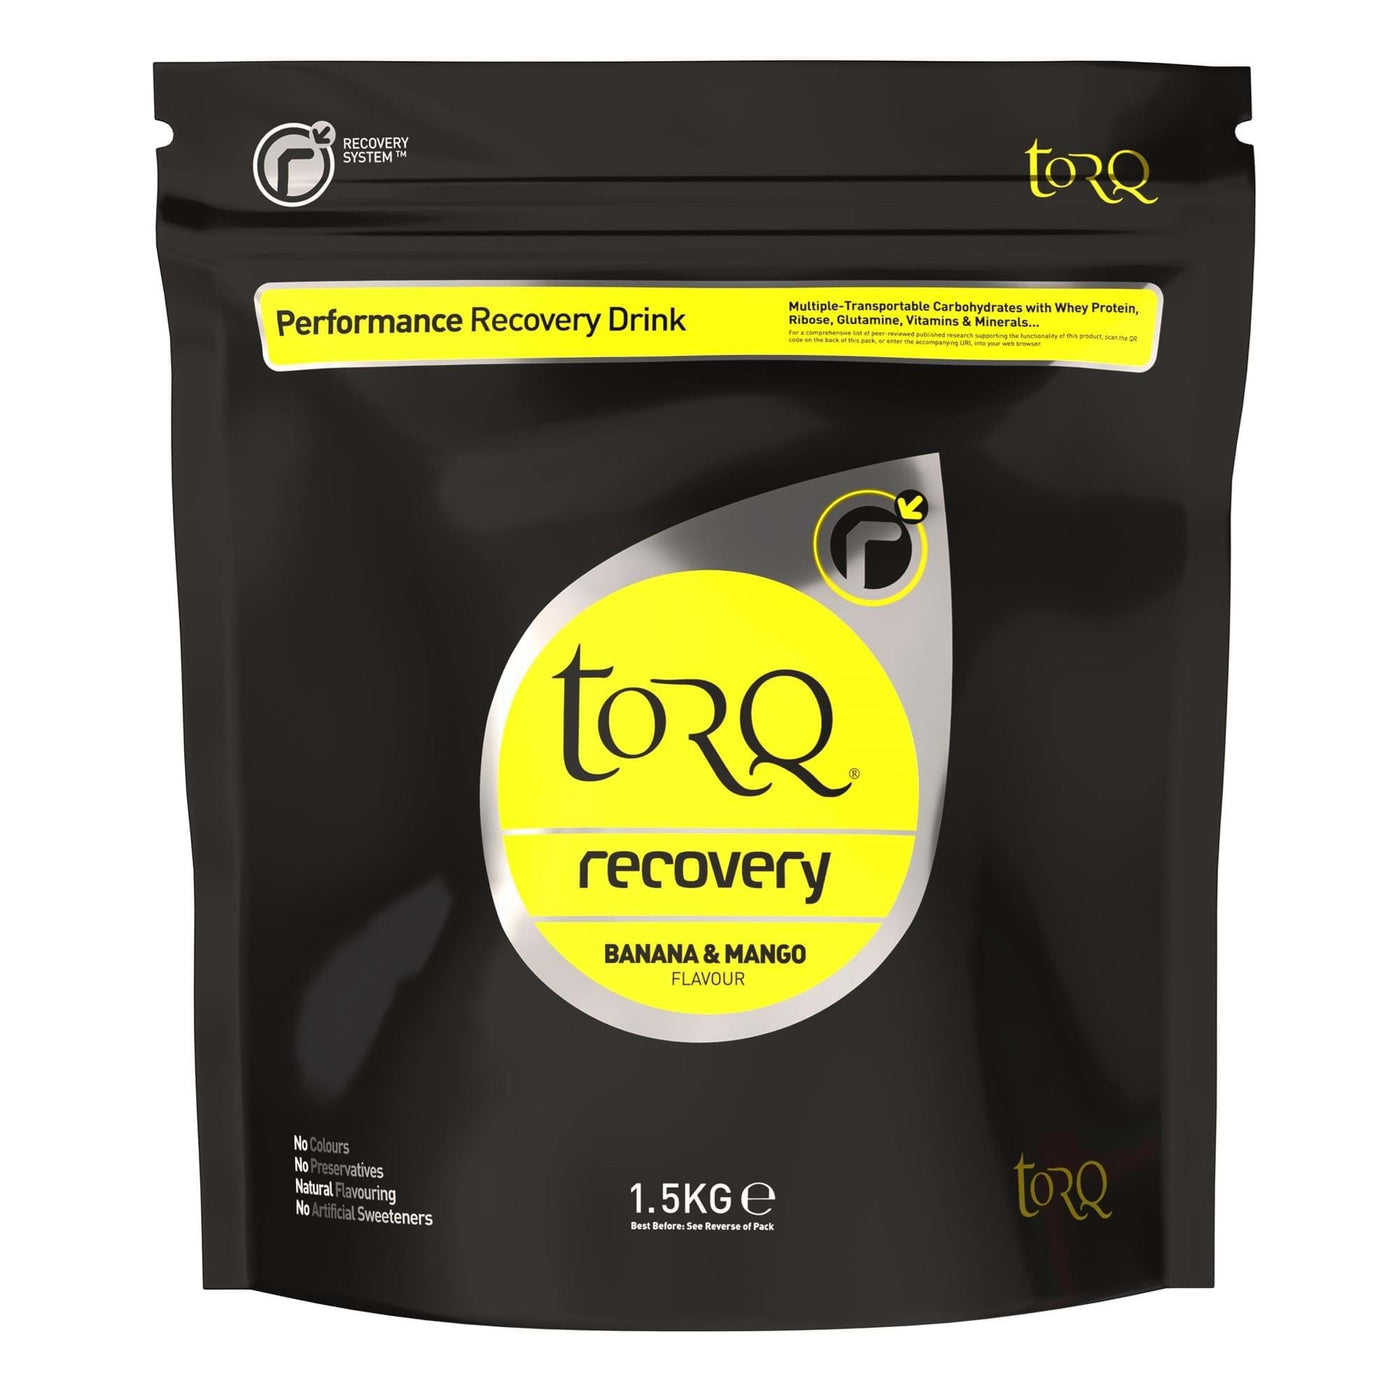 Torq Performance Recovery Drink 1.5kg